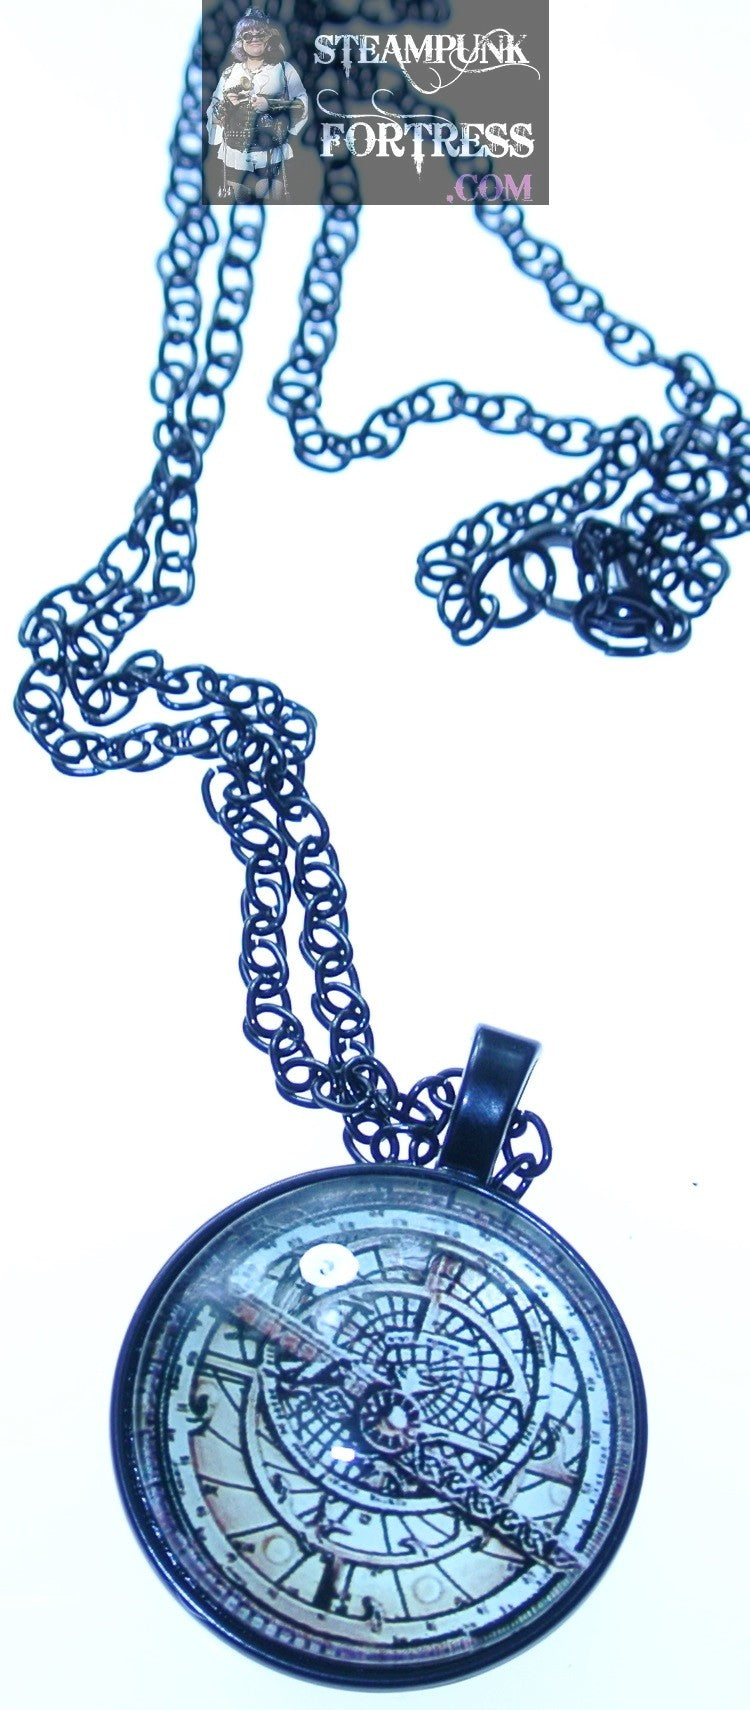 BLACK COMPASS STEAMPUNK NECKLACE STEAMPUNK FORTRESS